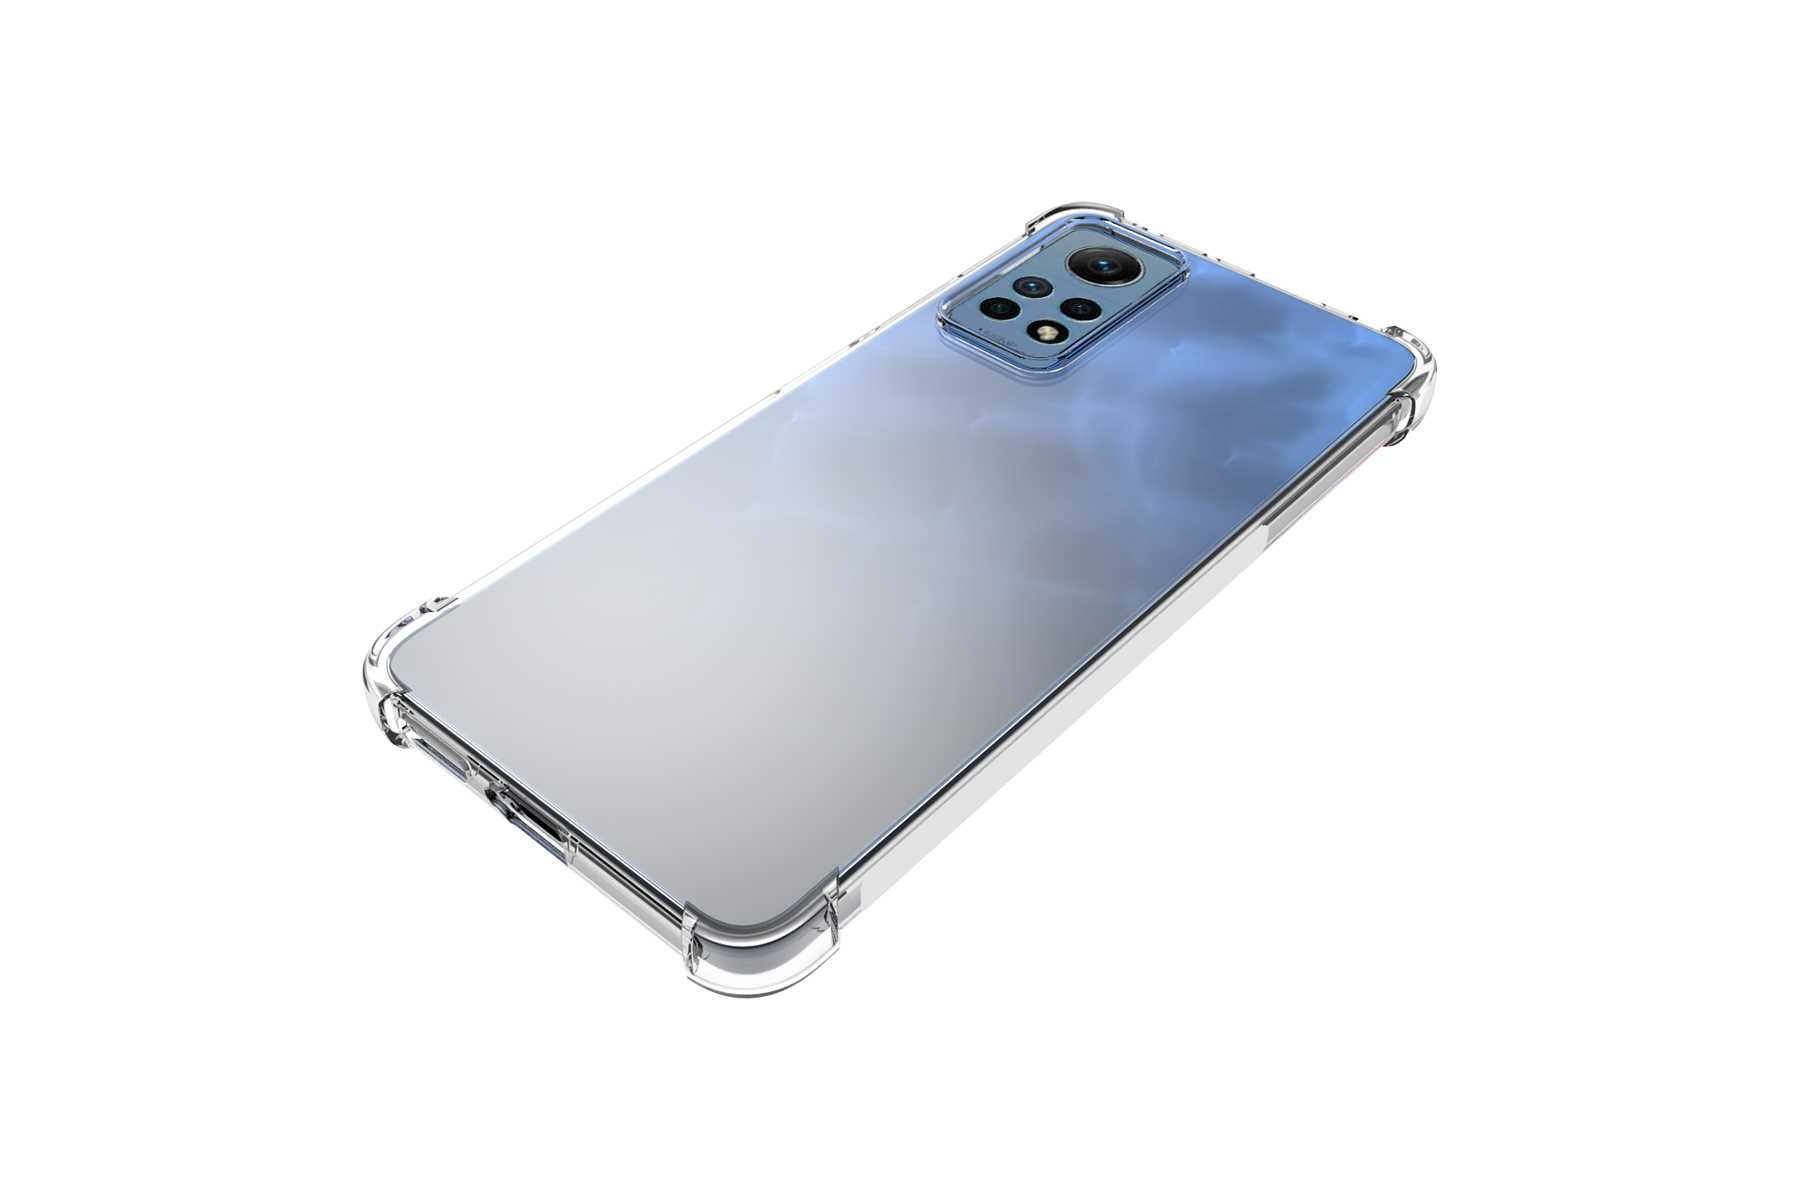 Redmi MTB Backcover, Xiaomi, Armor Clear 4G, ENERGY Note Pro MORE Transparent 12 Case,